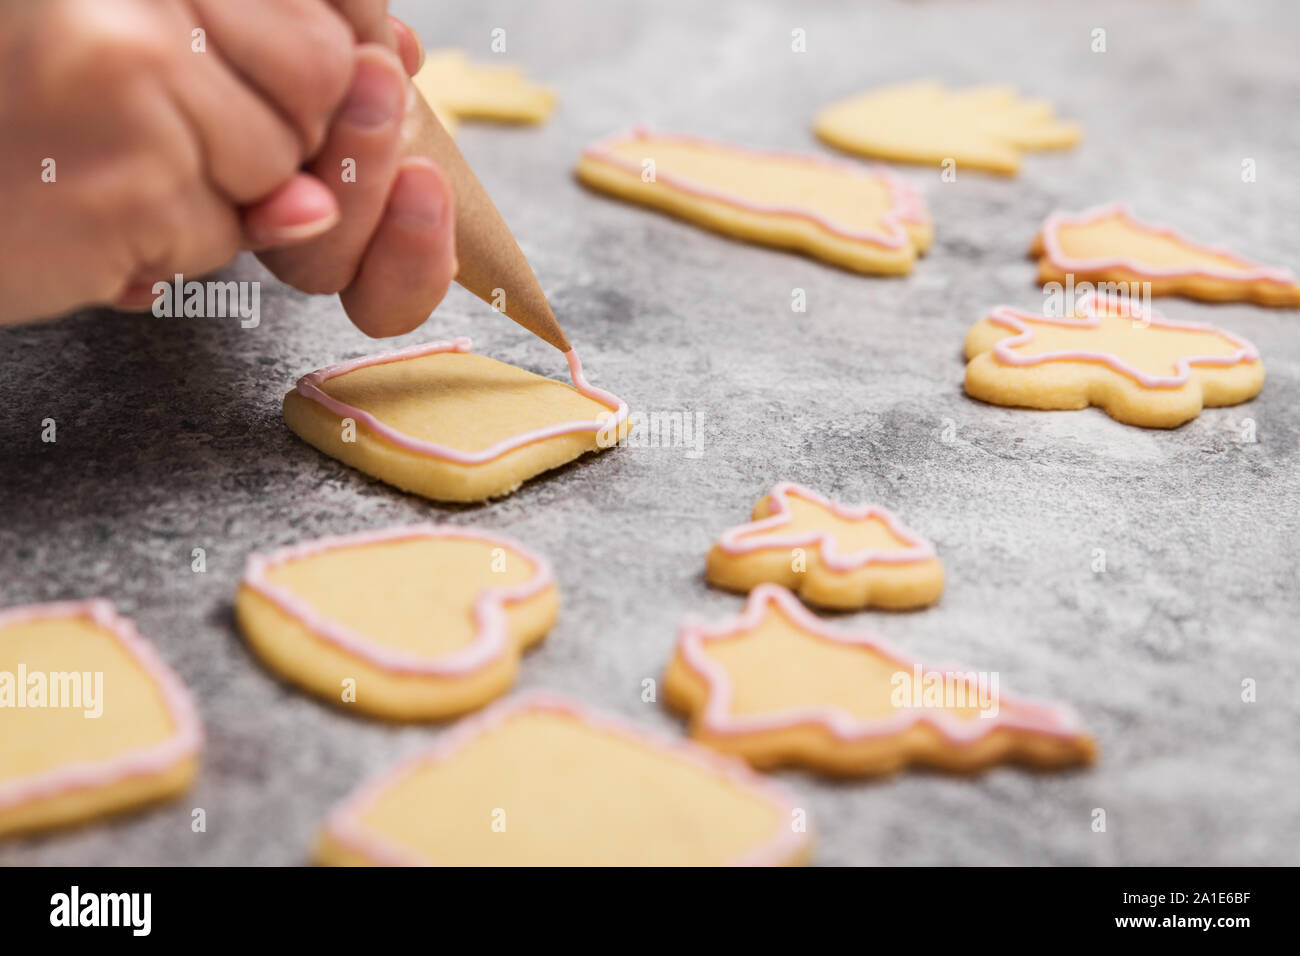 Female sugar baker is decoration christmas cookies with pink icing or frosting, workspace Stock Photo